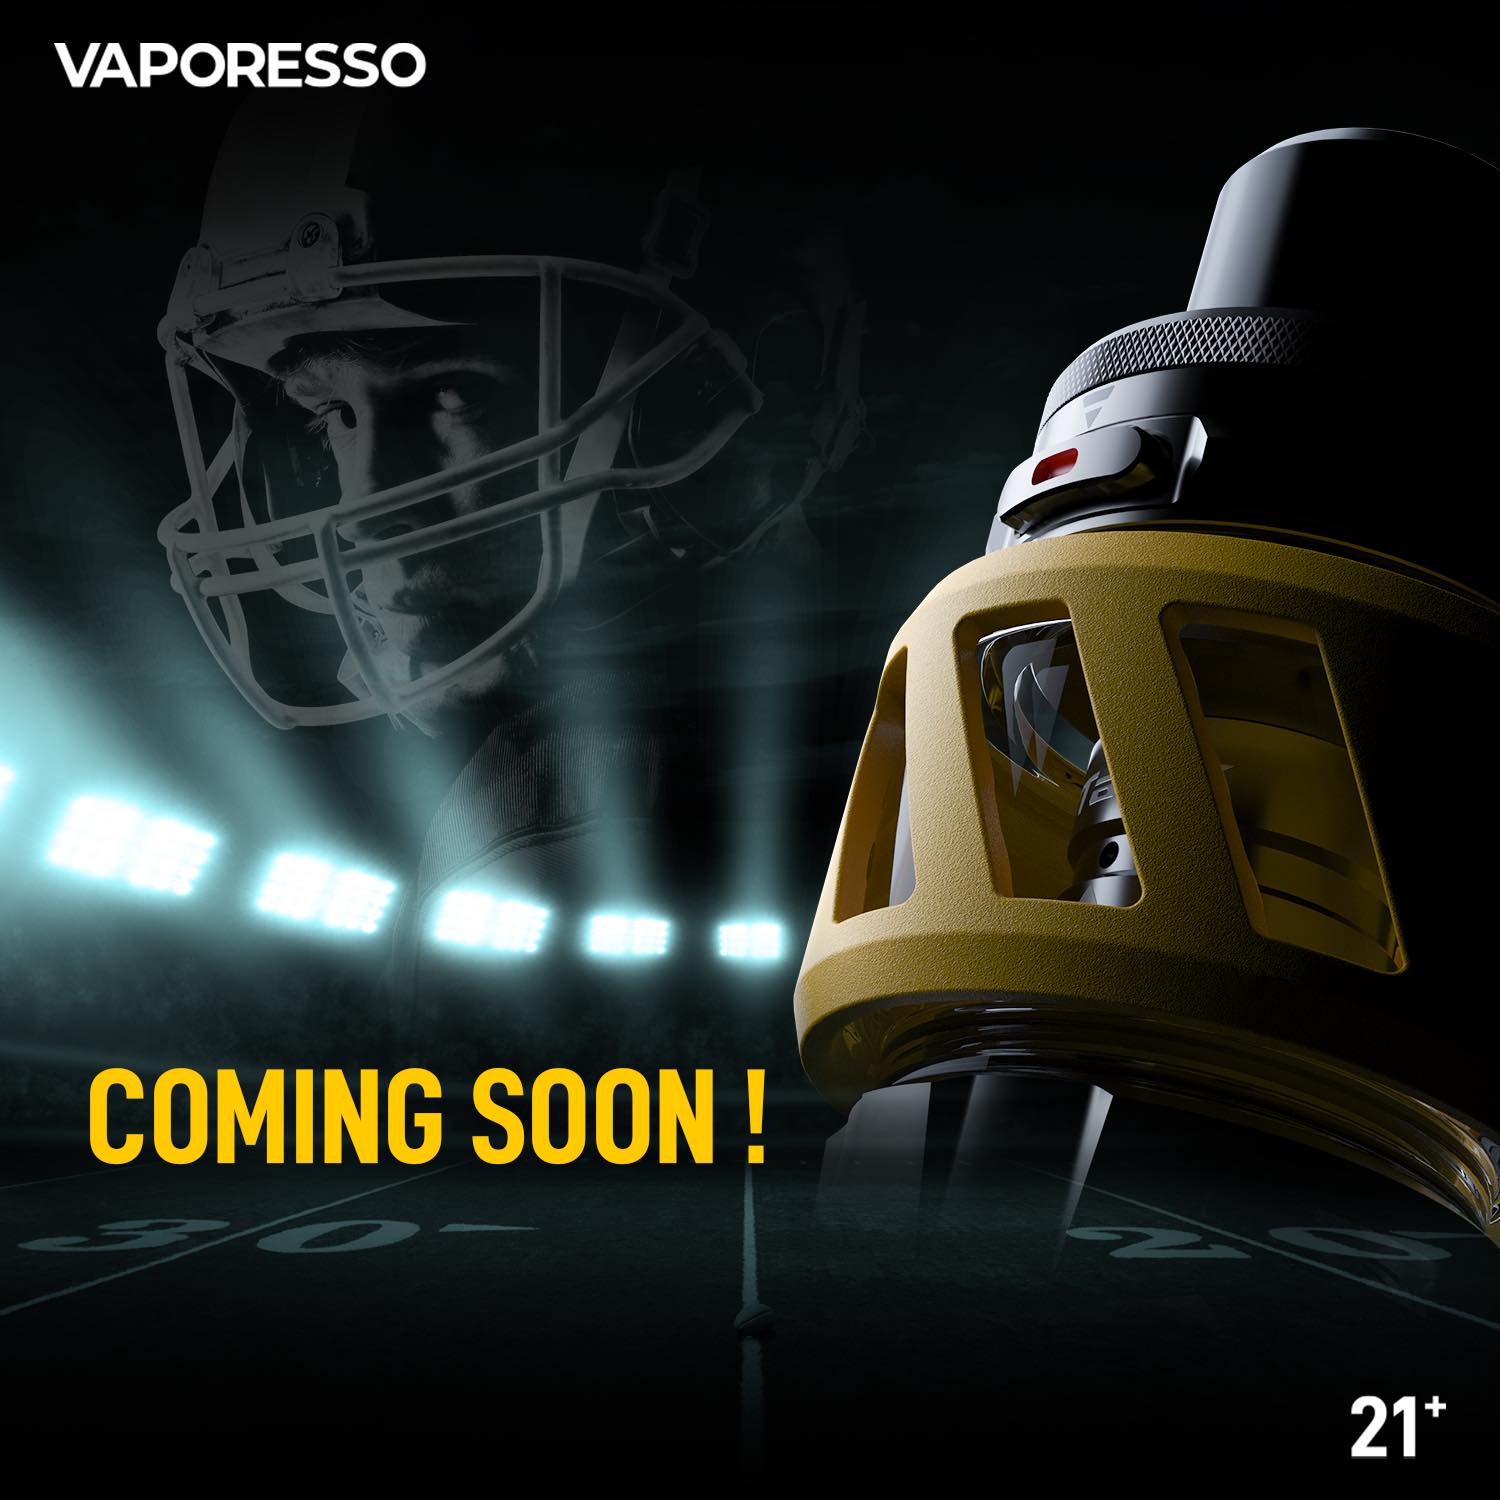 Vaporesso Vaping Products: A User’s Flavorful Journey and Candid Insights